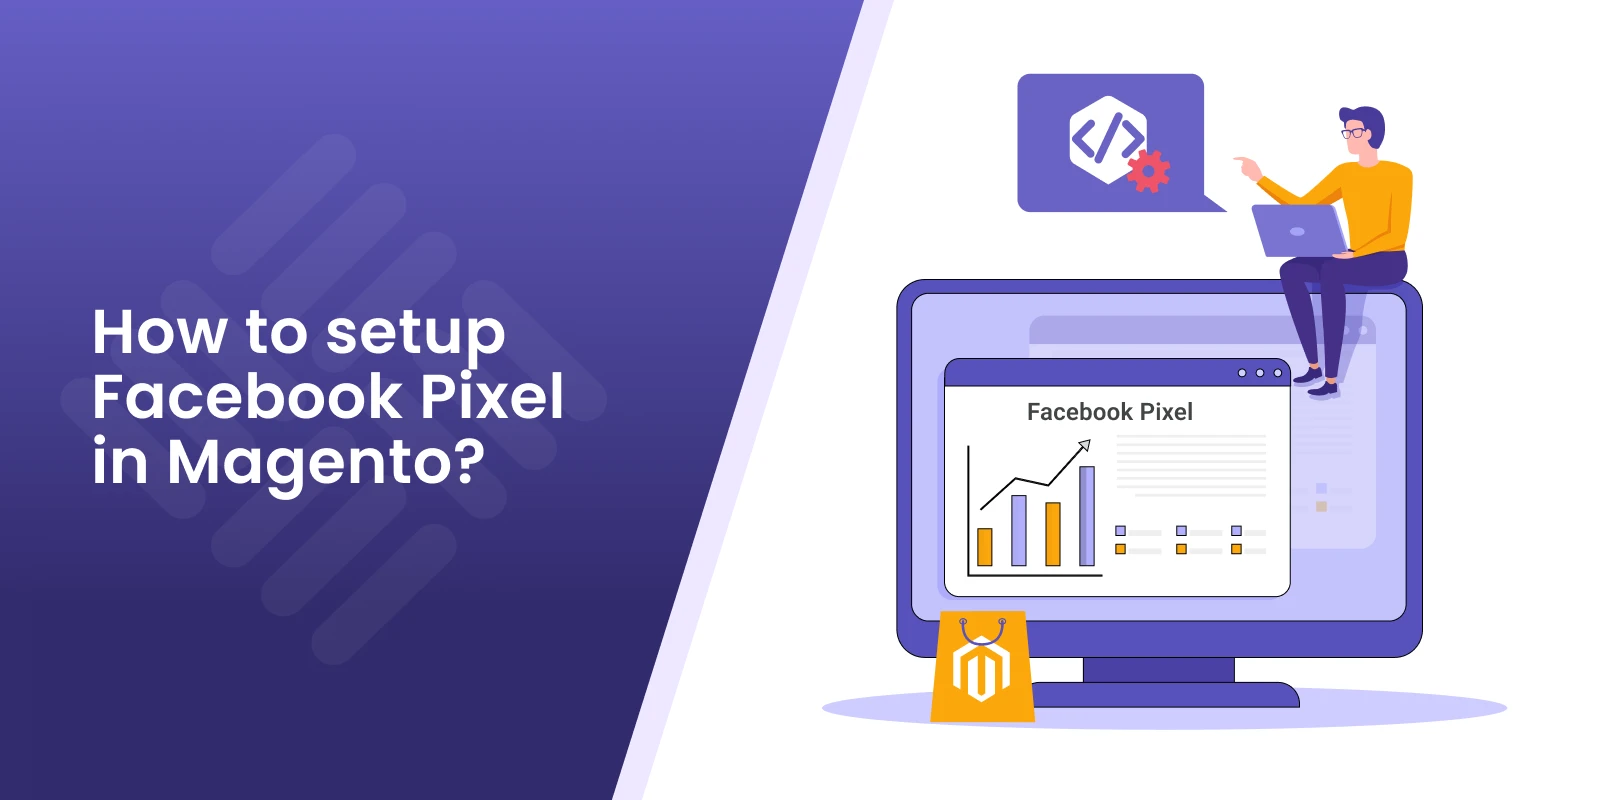 How to setup Facebook Pixel in Magento 2?